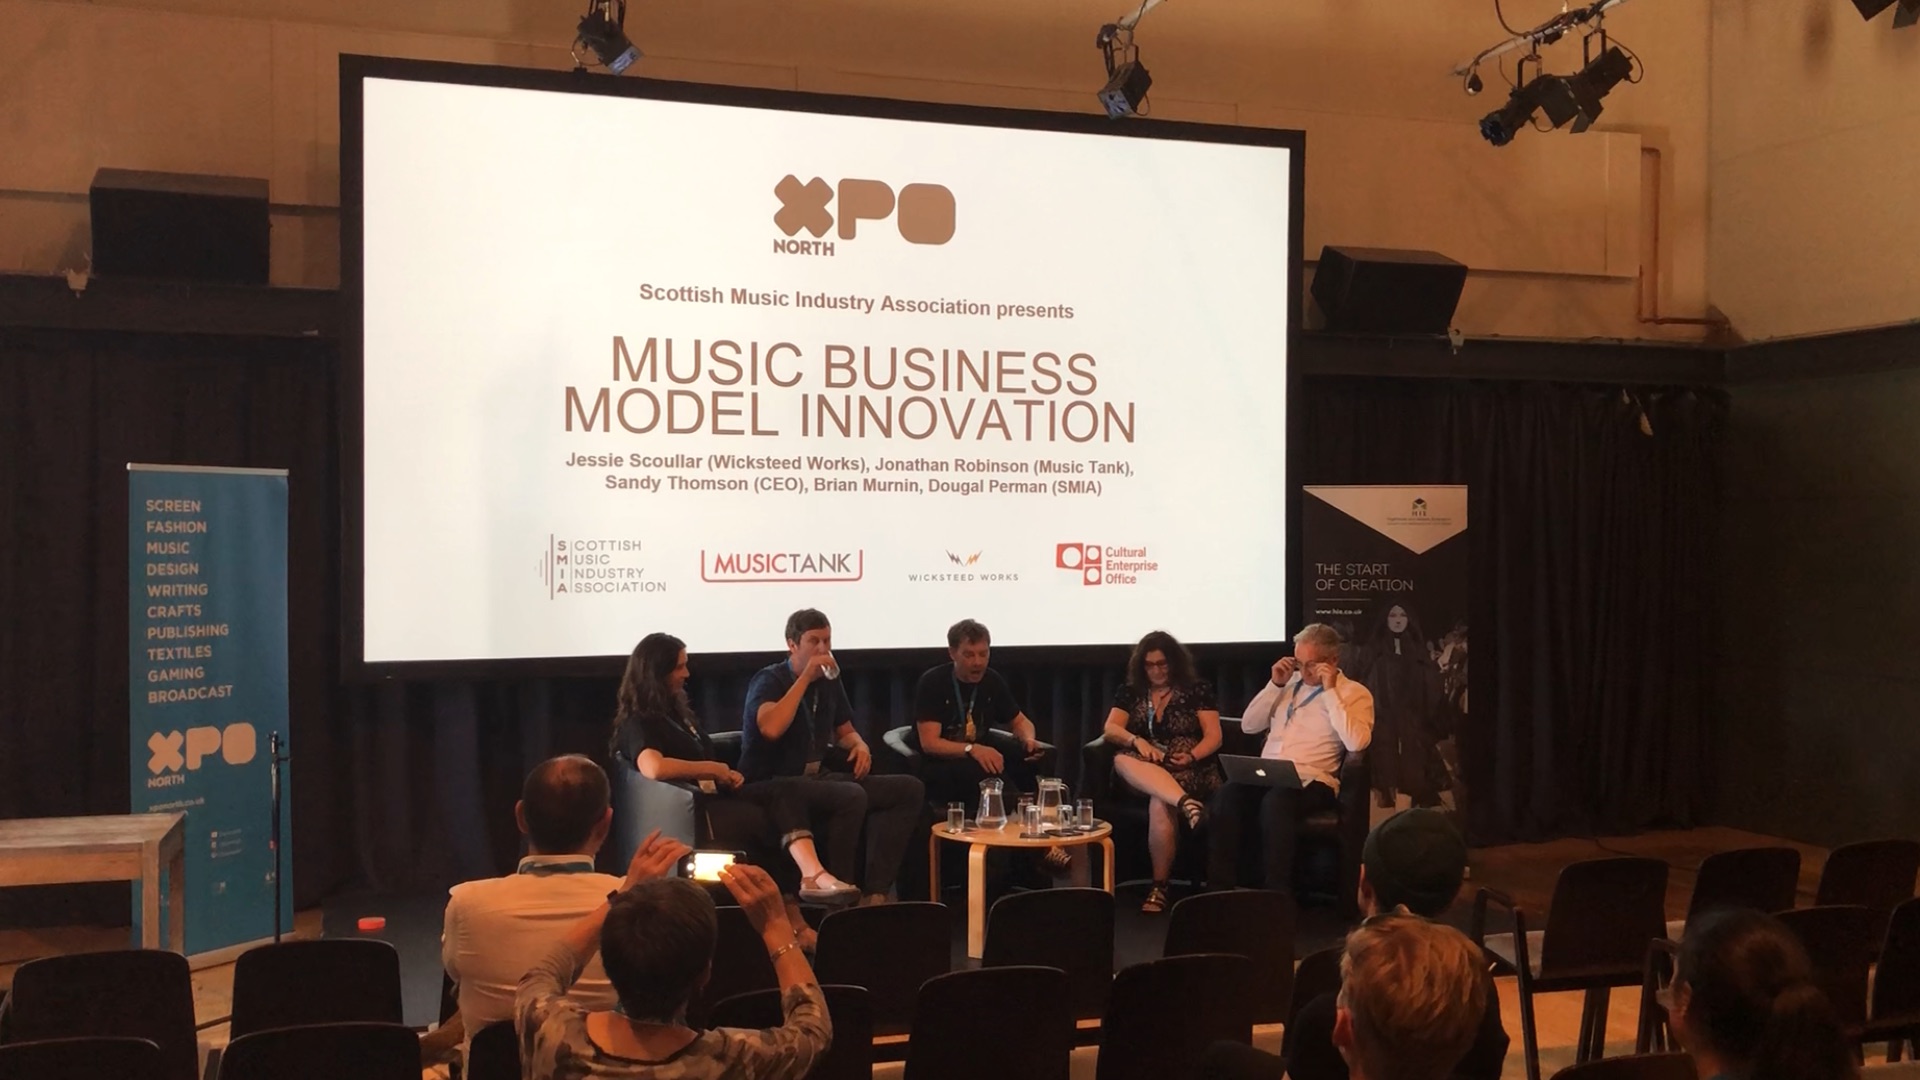 Music Business Model Innovation Panel Discussion (XpoNorth 2018)